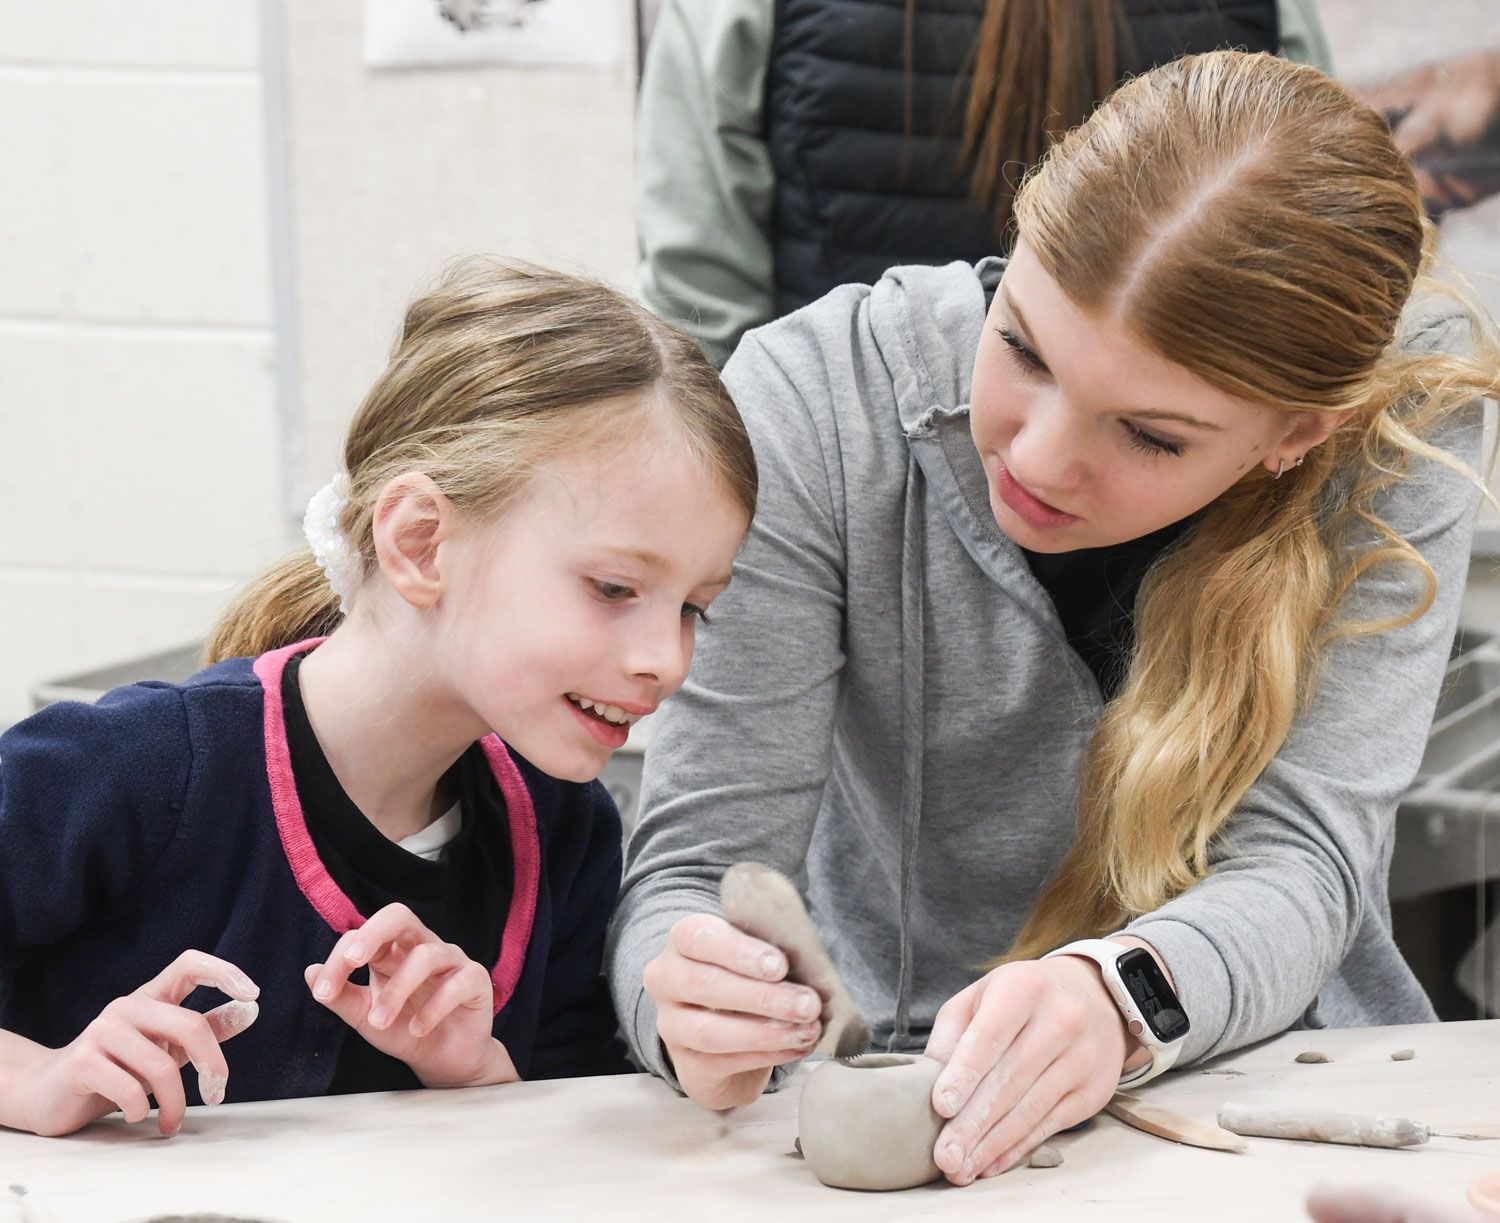 High school girl is working with an elementary student on a ceramics project.